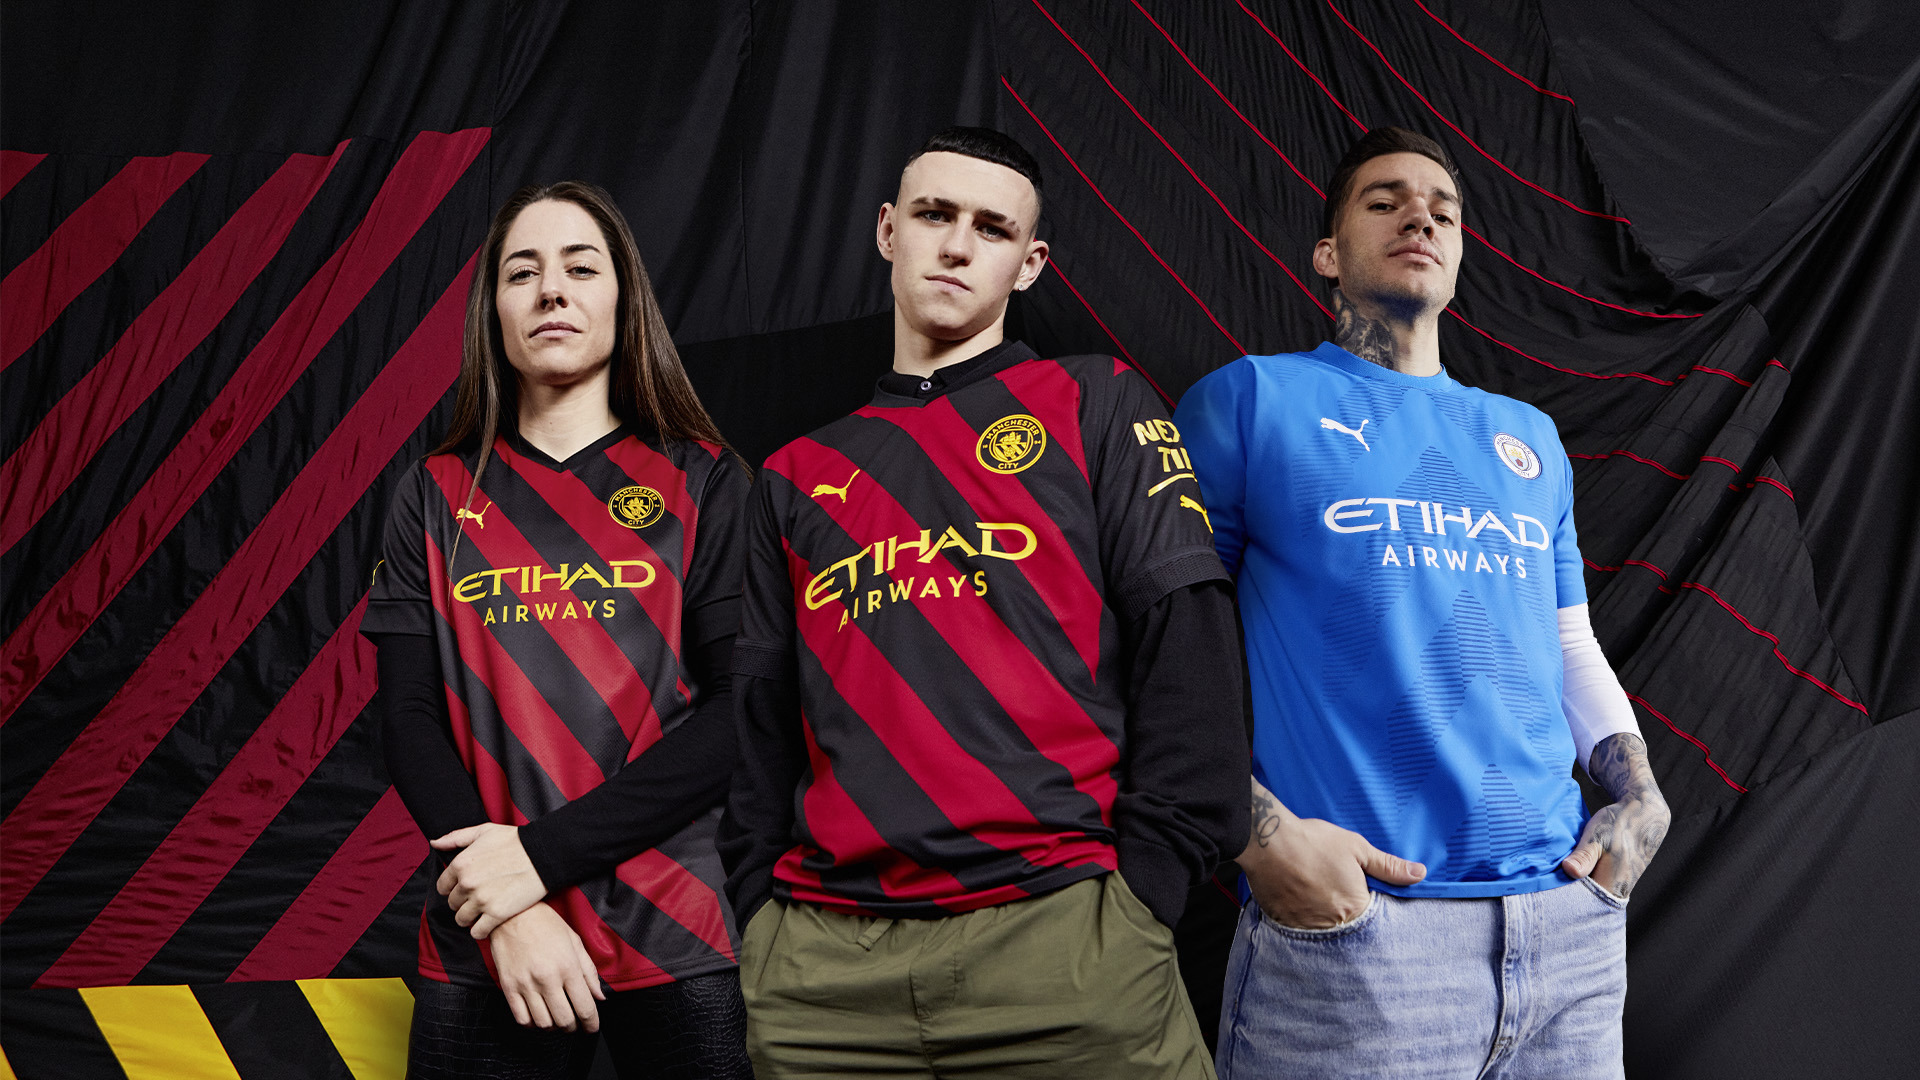 Scheermes Volg ons Conjugeren PUMA and City celebrate iconic era with new 2022/23 away kit